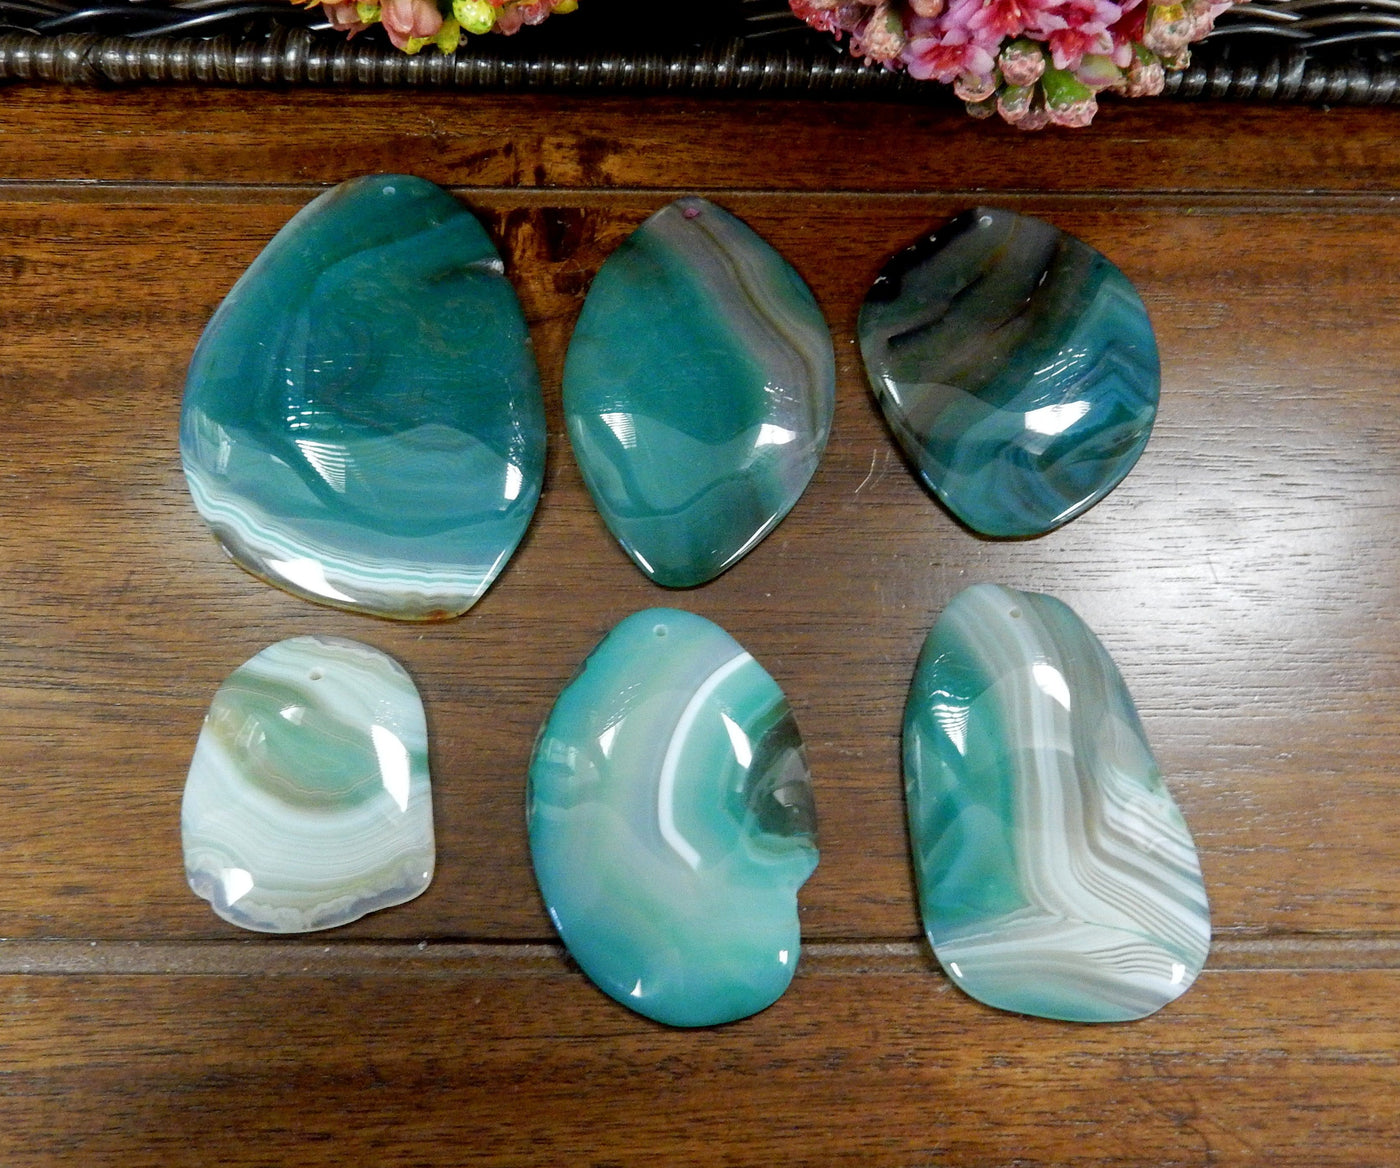 6 Green FreeForm Agate Slices with Polished Edge on Wooden Background.